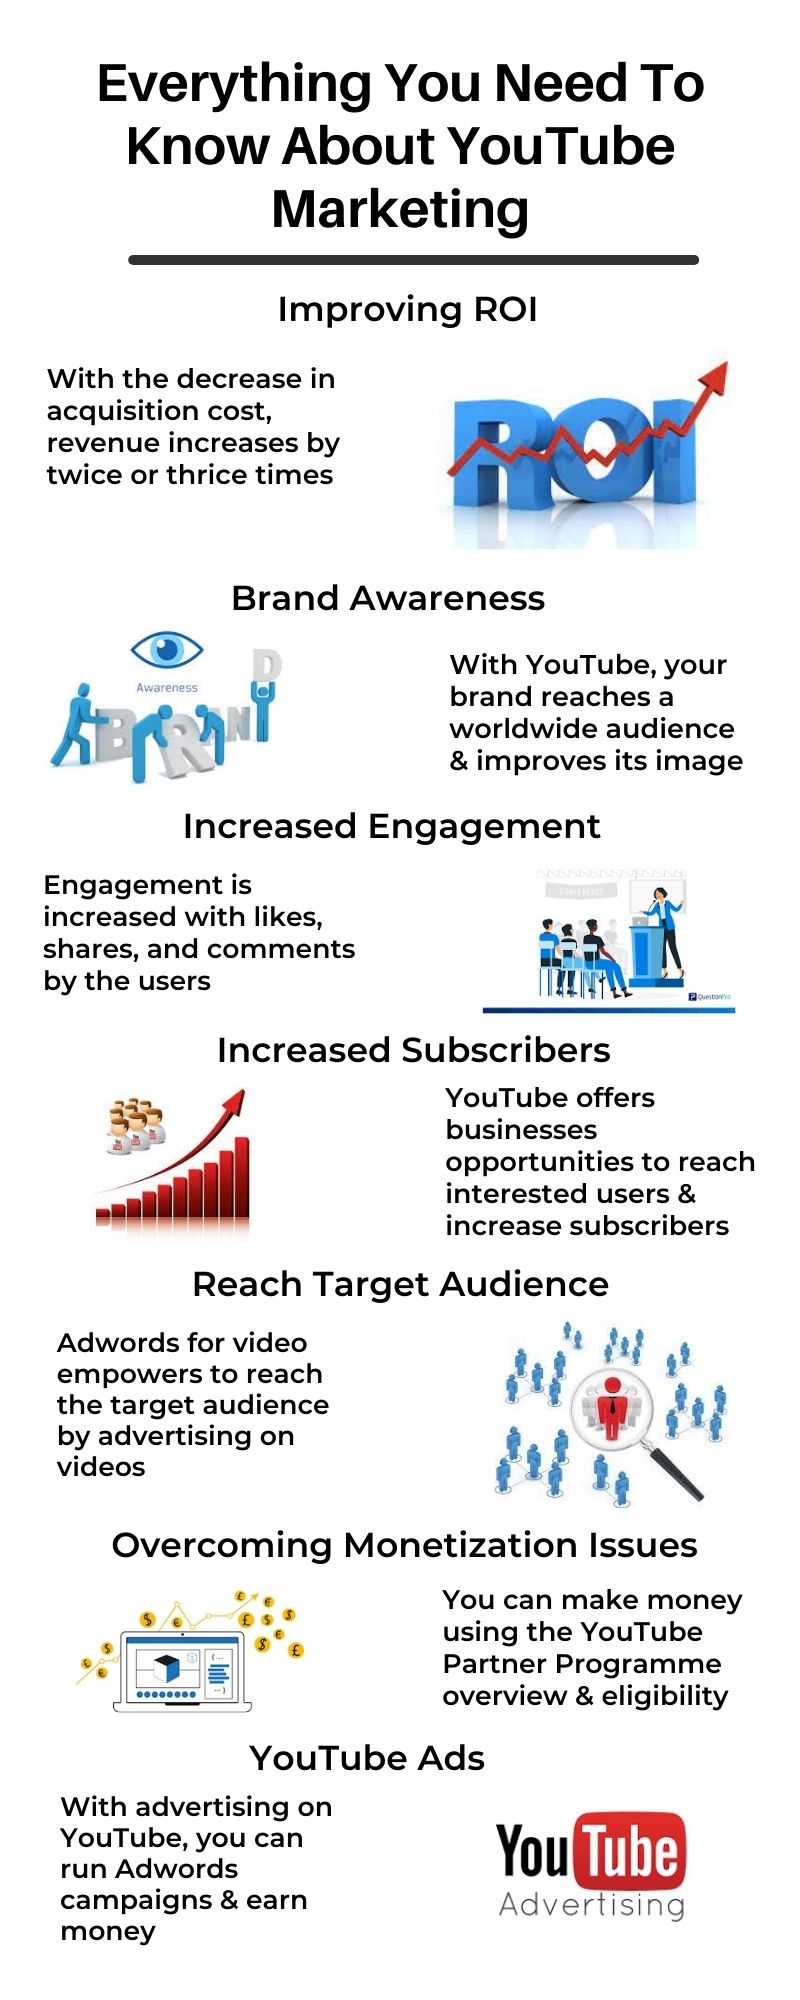 Everything You Need To Know About YouTube Marketing